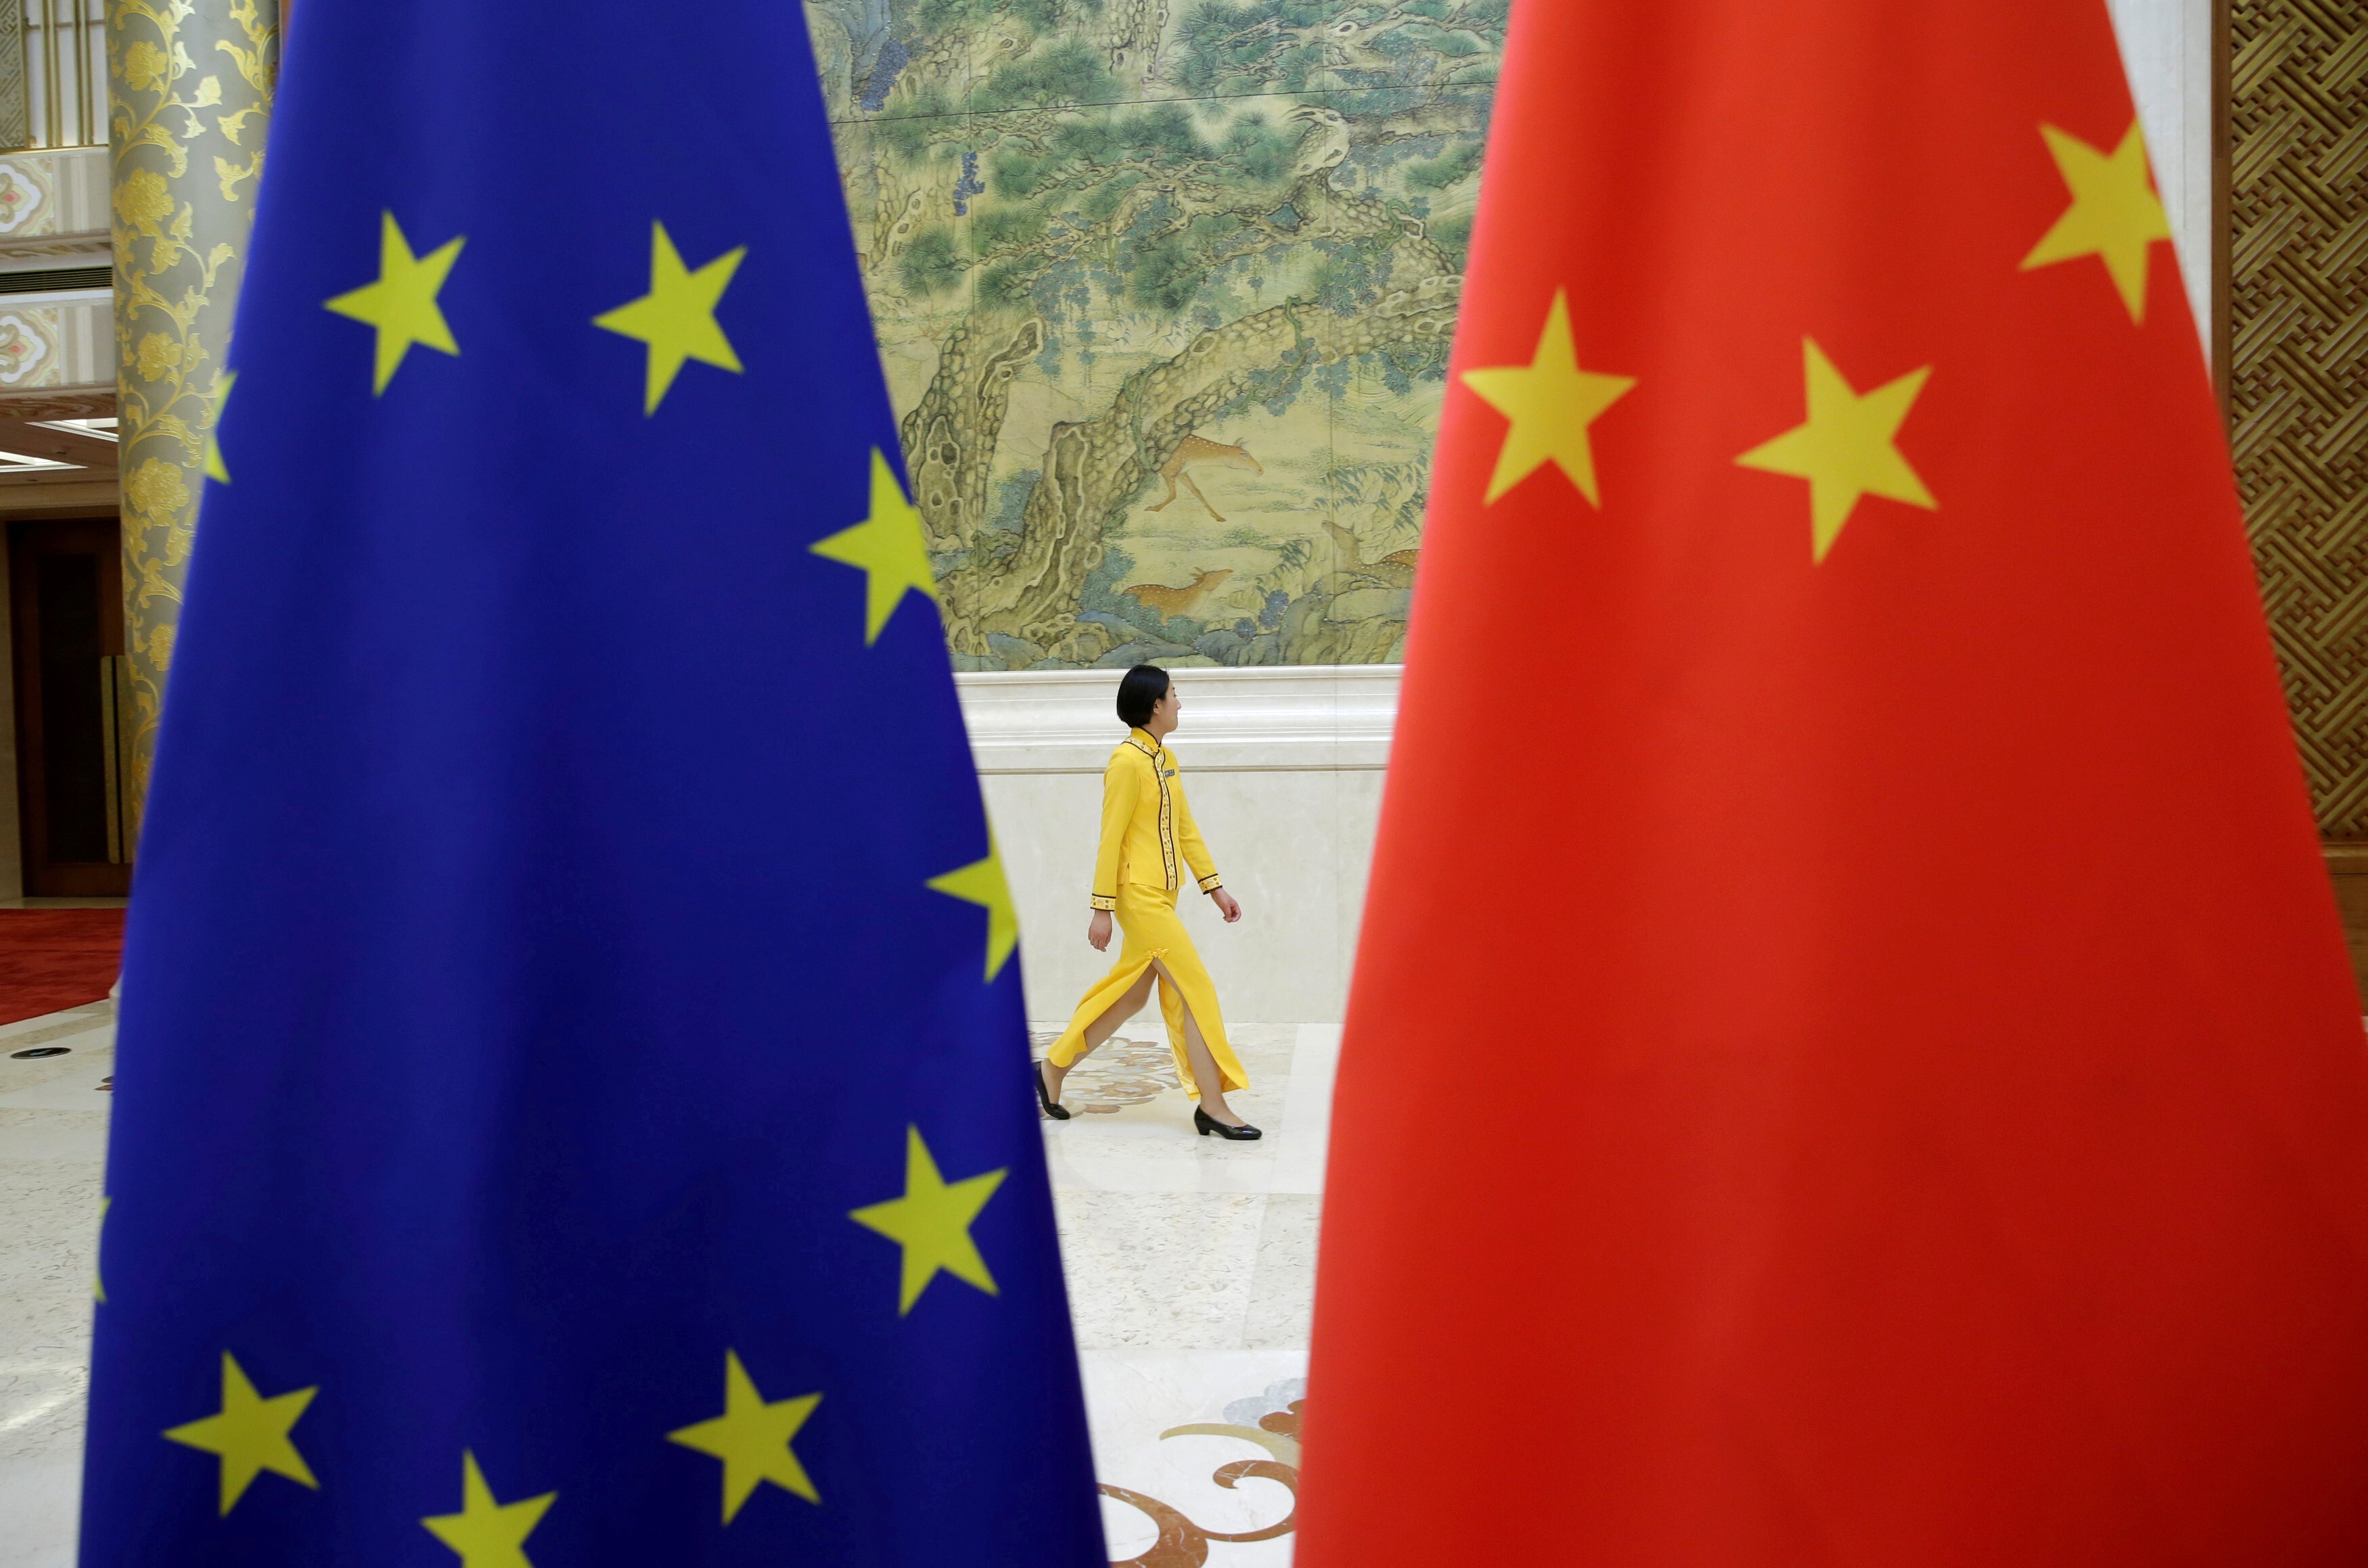 An attendant walks past EU and China flags ahead of the EU-China High-level Economic Dialogue at Diaoyutai State Guesthouse in Beijing on June 25, 2018. Photo: Reuters